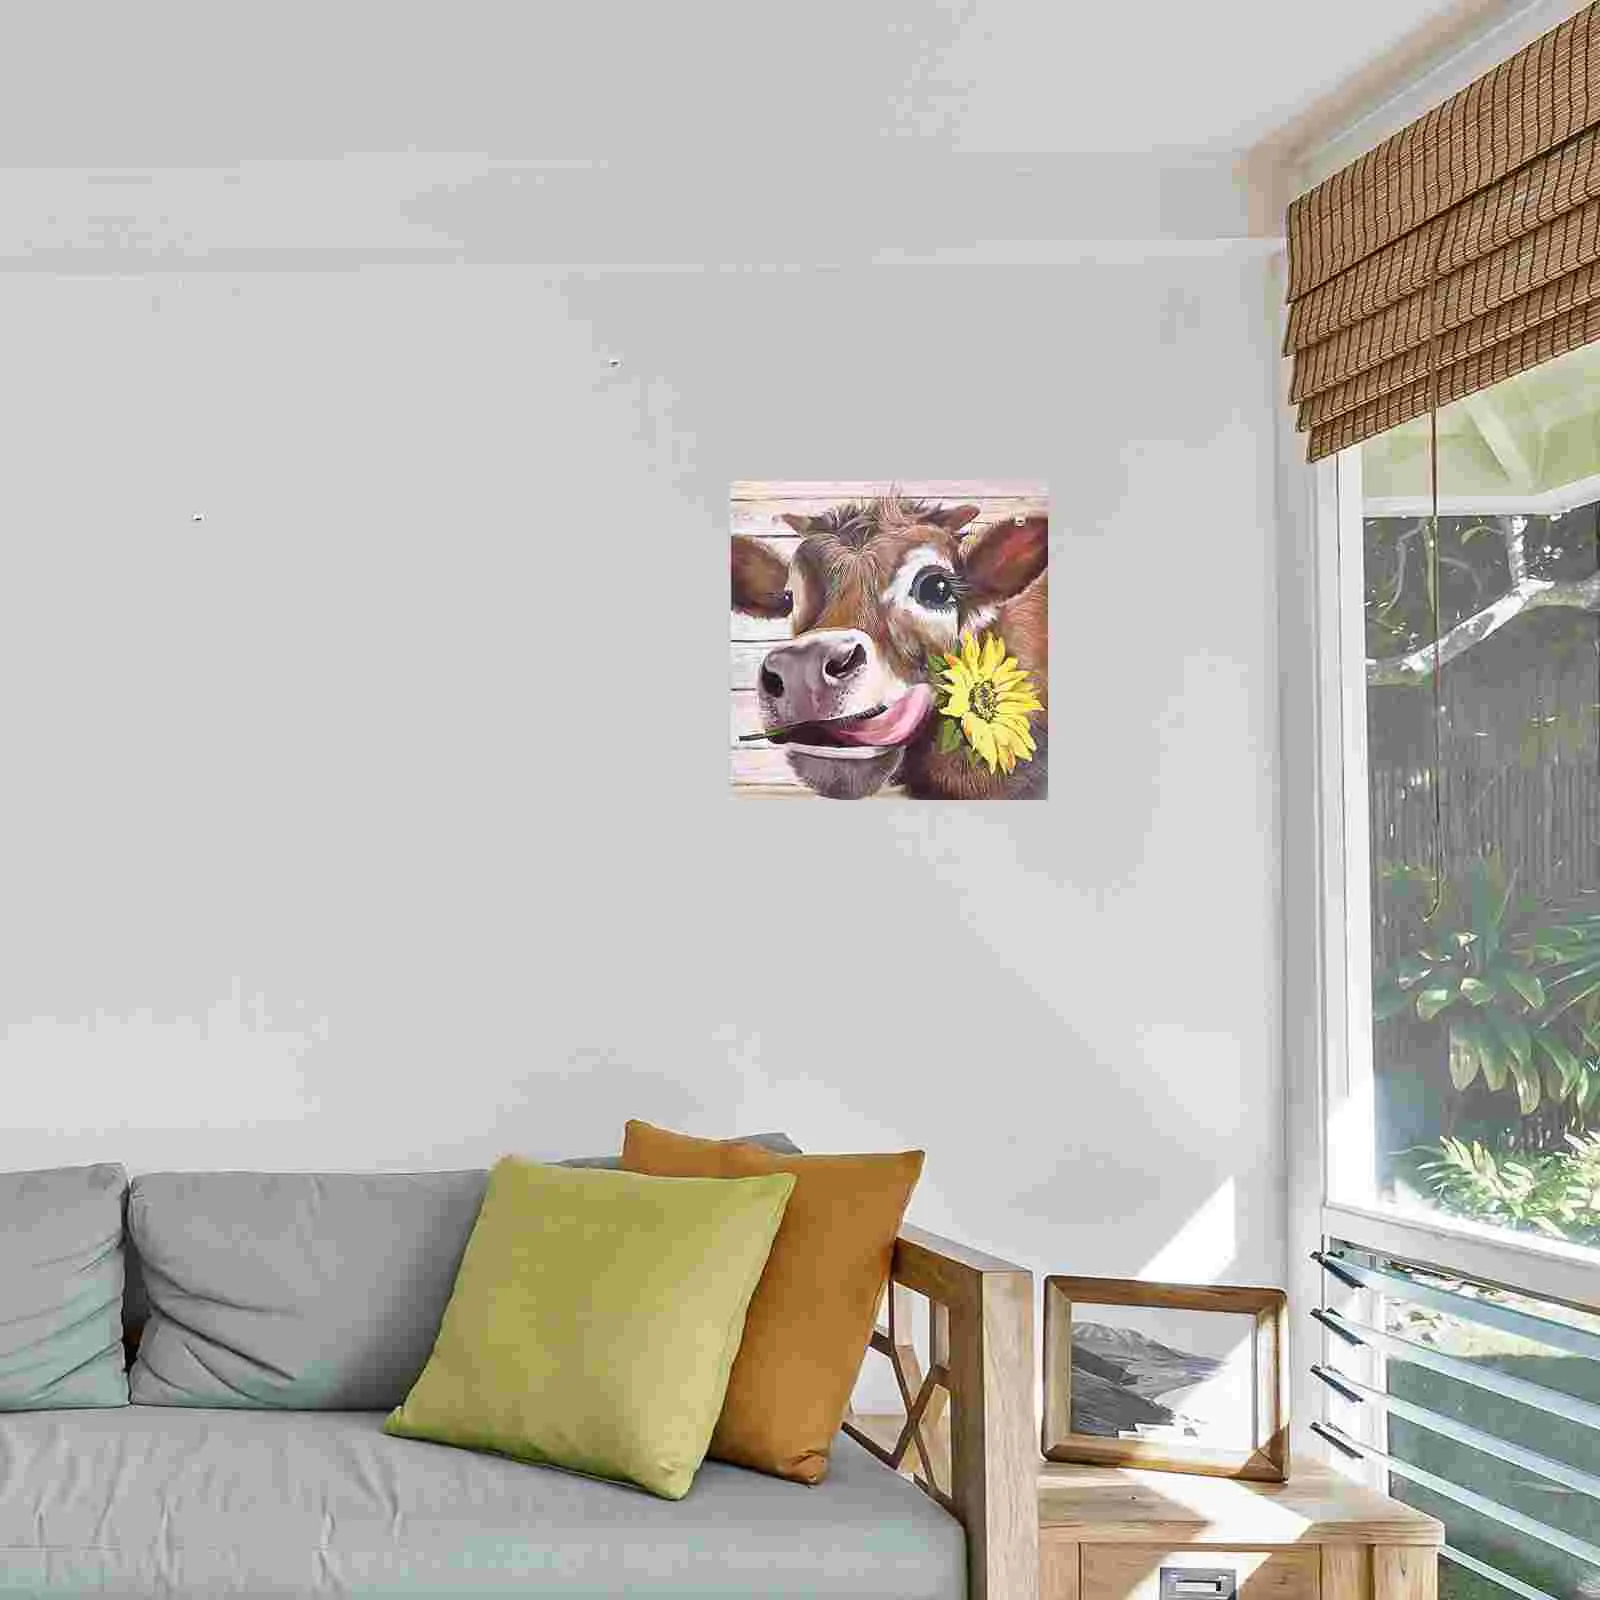 

Wall Cow Painting Farmhouse Canvaspicture Decor Pictures Decoration Paintings Frameless Country Rustic Prints Farm Print